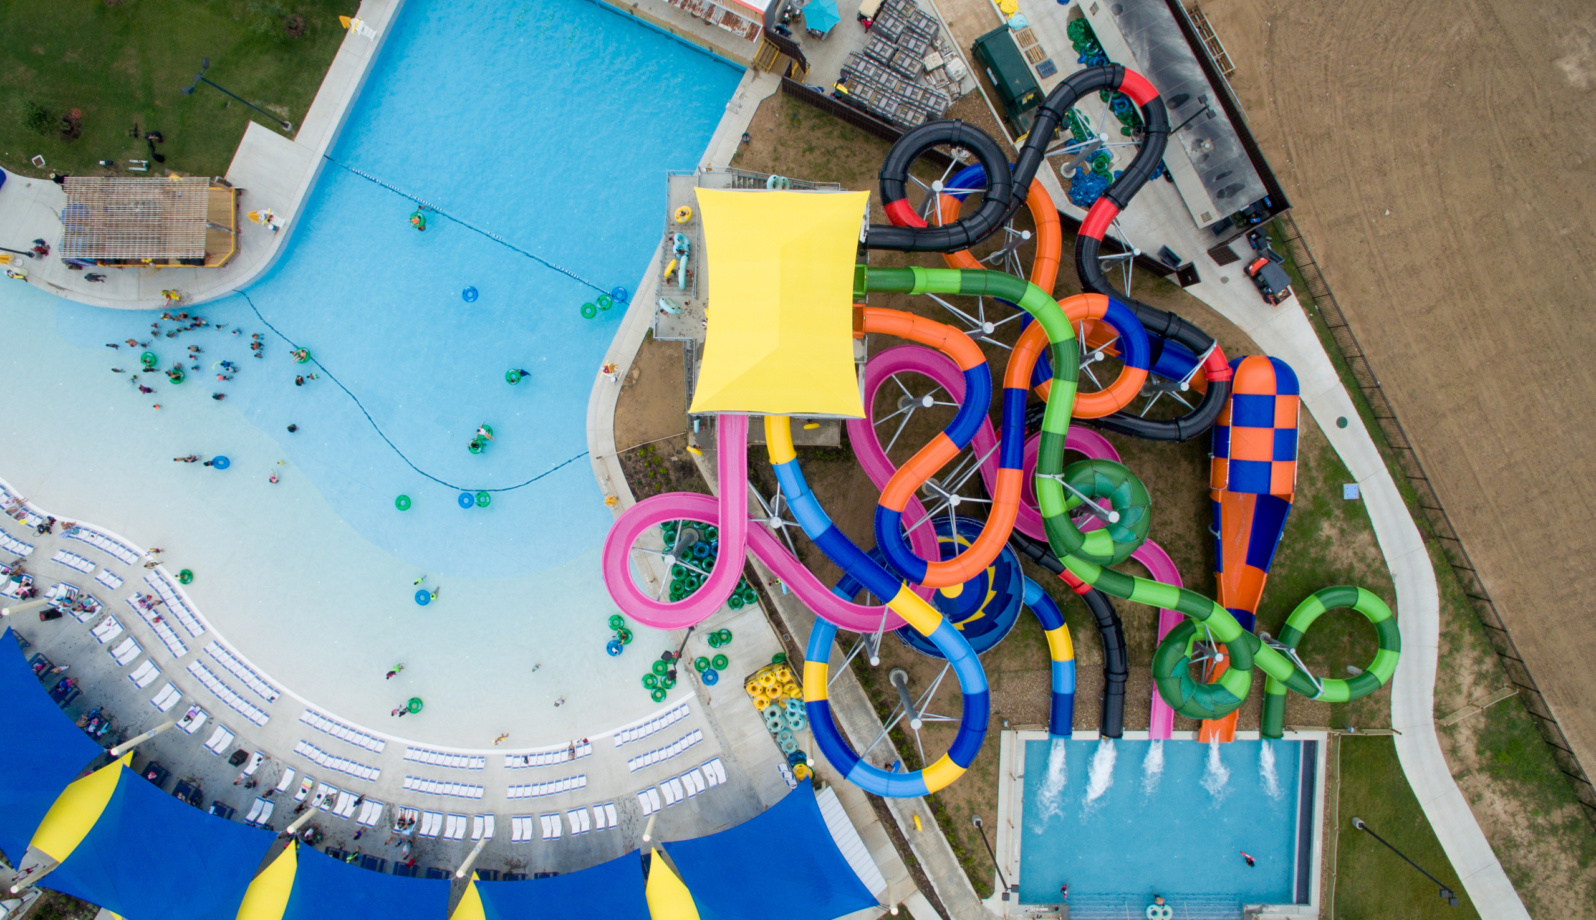 BUILDING WORLD-CLASS DESTINATIONS FOR FAMILIES - WHITEWATER WEST, BEST AND MOST FUN WATER PARKS - AERIAL - TYPHOON TEXAS